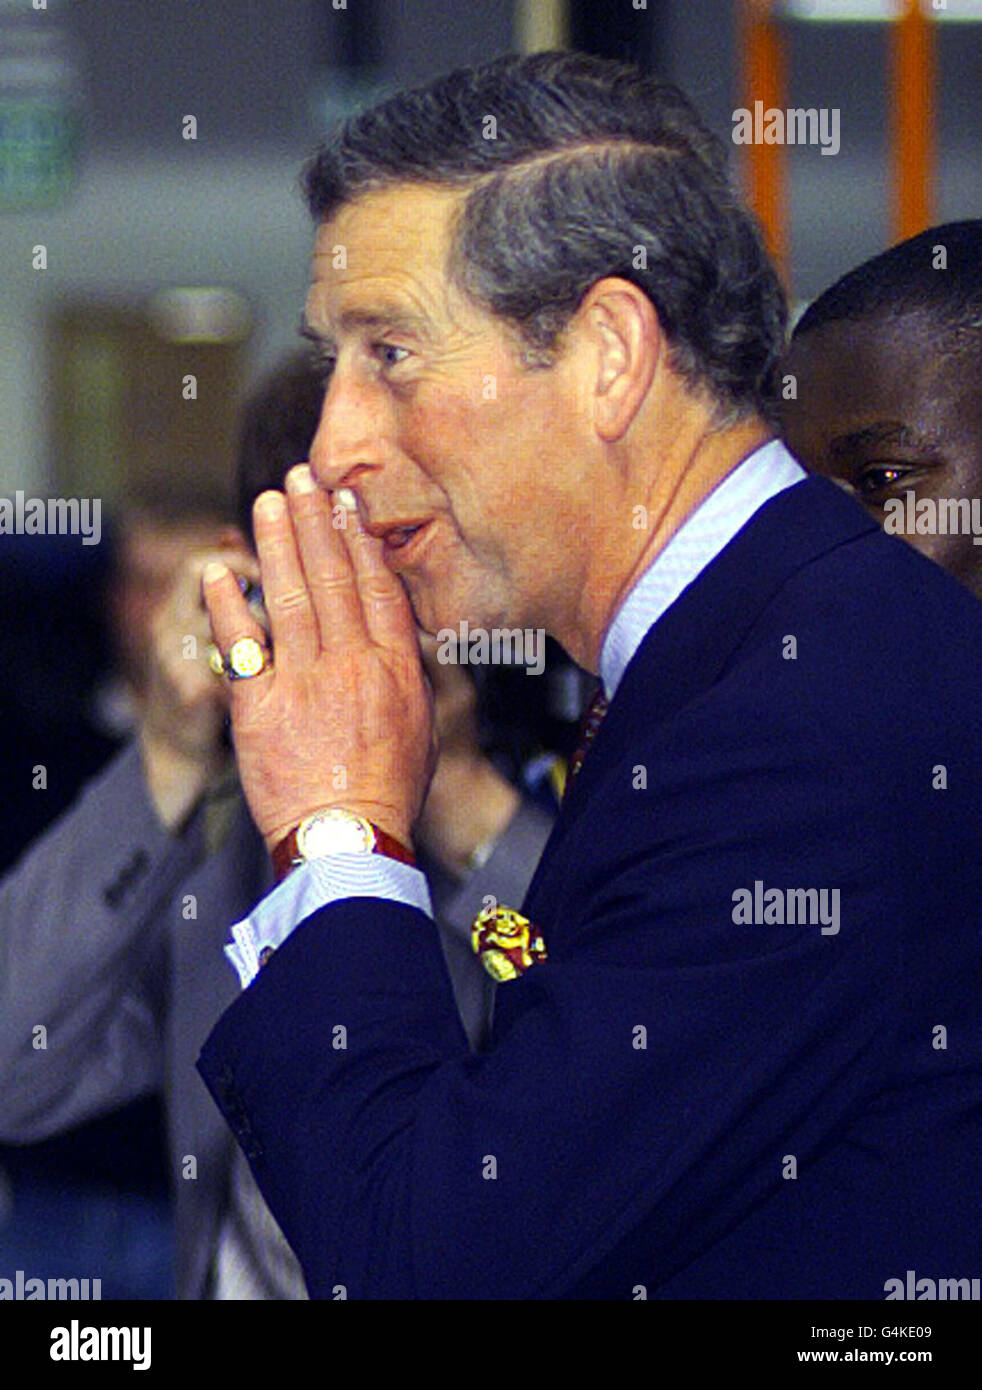 Prince Charles has a quiet word with an employee, as he opens the Dudley Stationery Distribution Centre, at Bow East London. Dudley has earned Royal Warrants to supply stationery for both The Queen and The Prince of Wales. Stock Photo